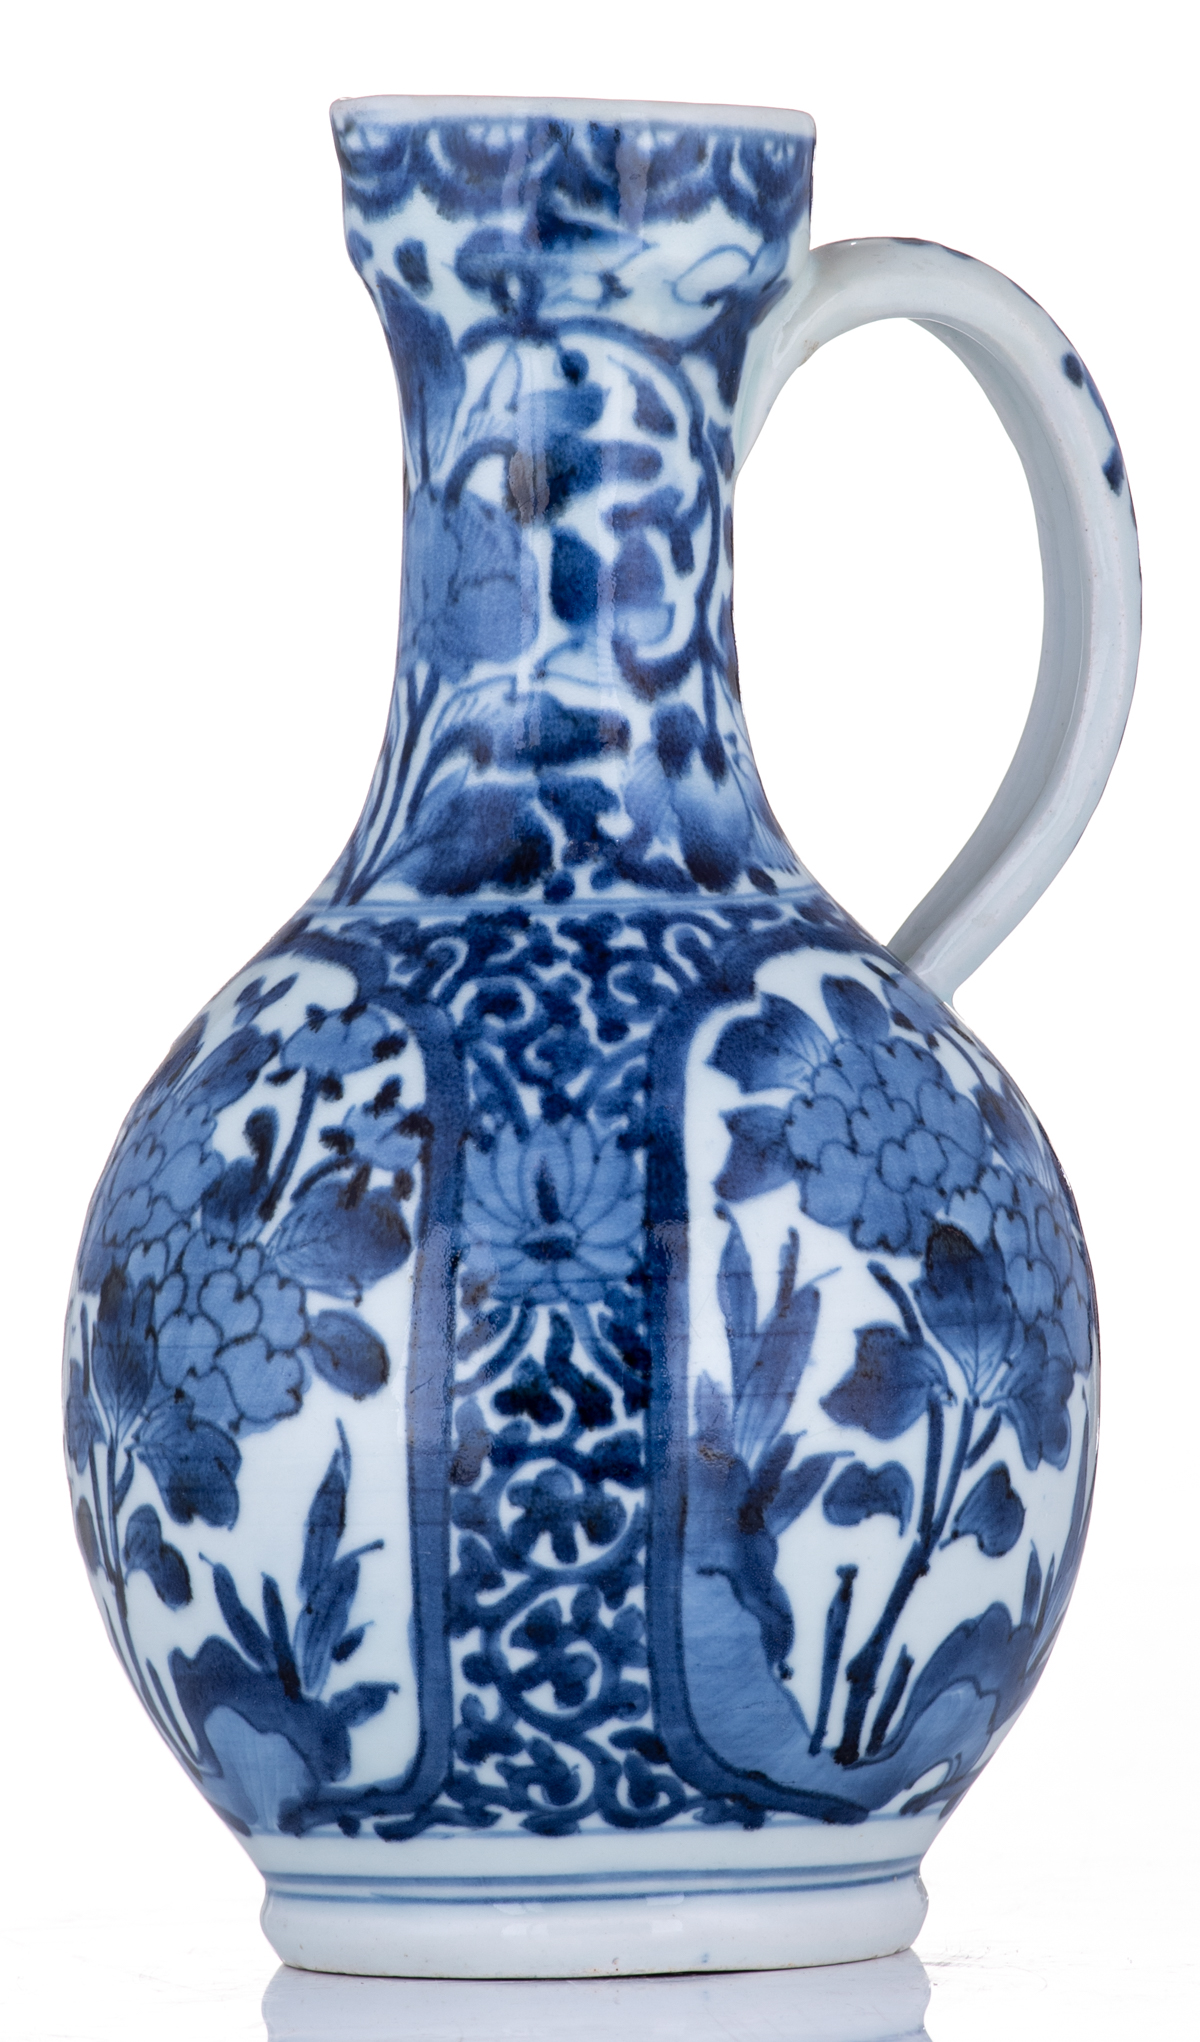 A Japanese last quarter of the 17thC Arita jug, with blue and white scrollwork all over, and roundel - Image 2 of 8